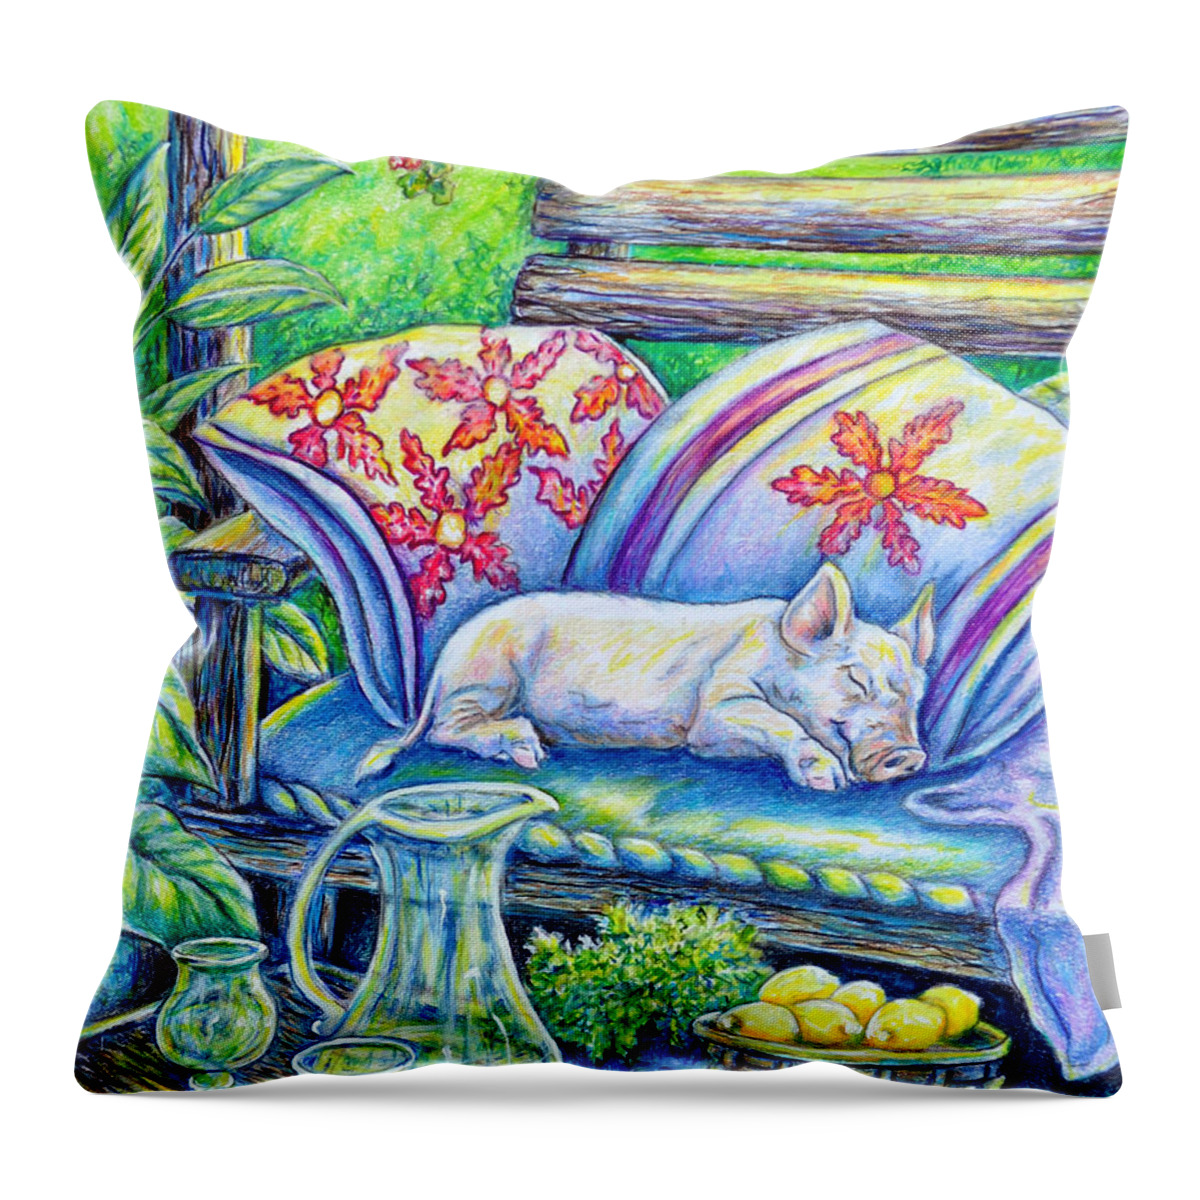 Pig Throw Pillow featuring the painting Pig On A Porch by Gail Butler